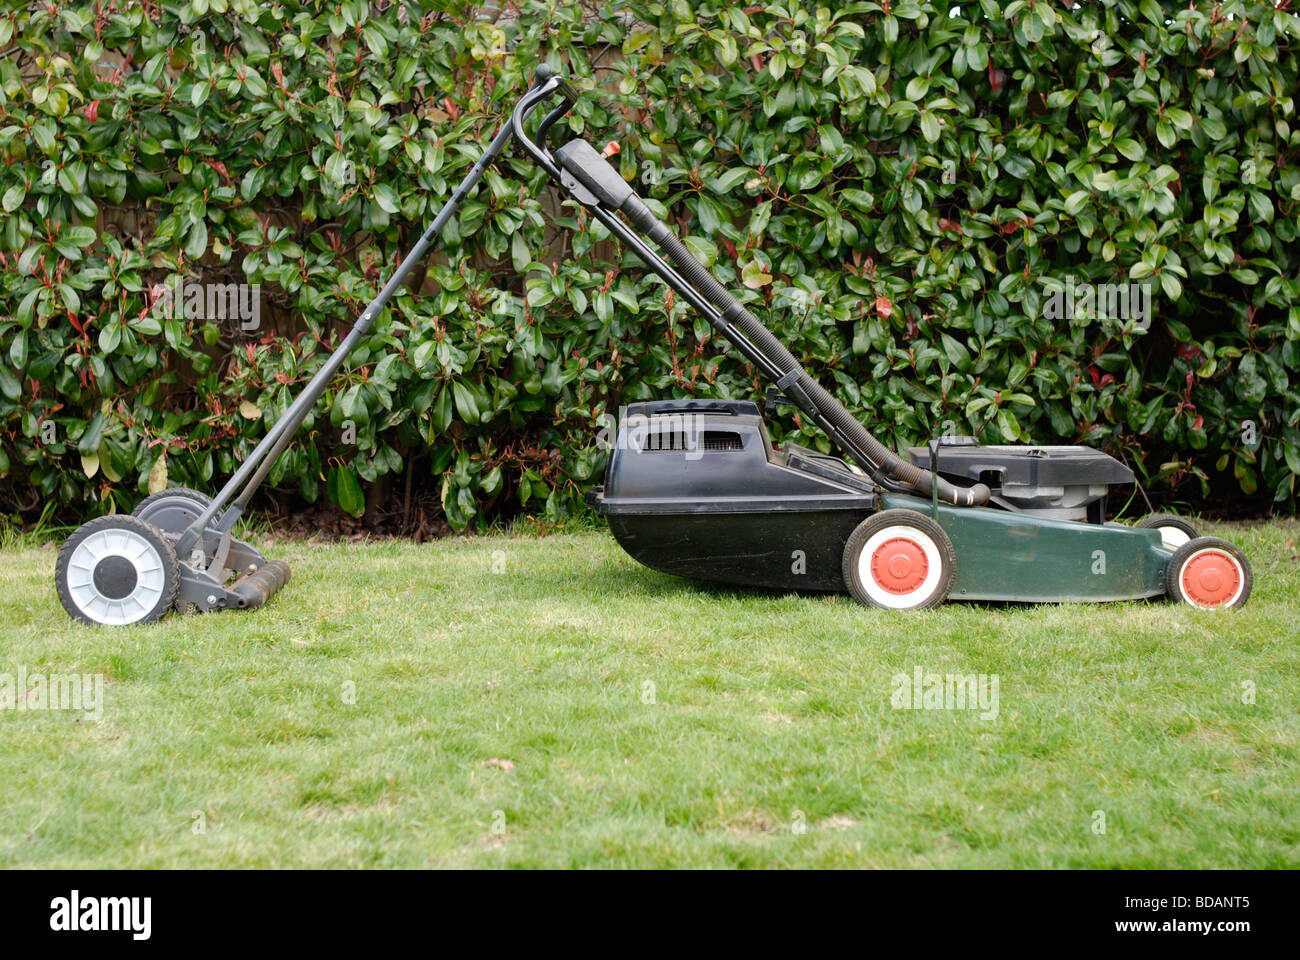 A pollution free push mower offers a sustainable alternative to a petrol mower Stock Photo